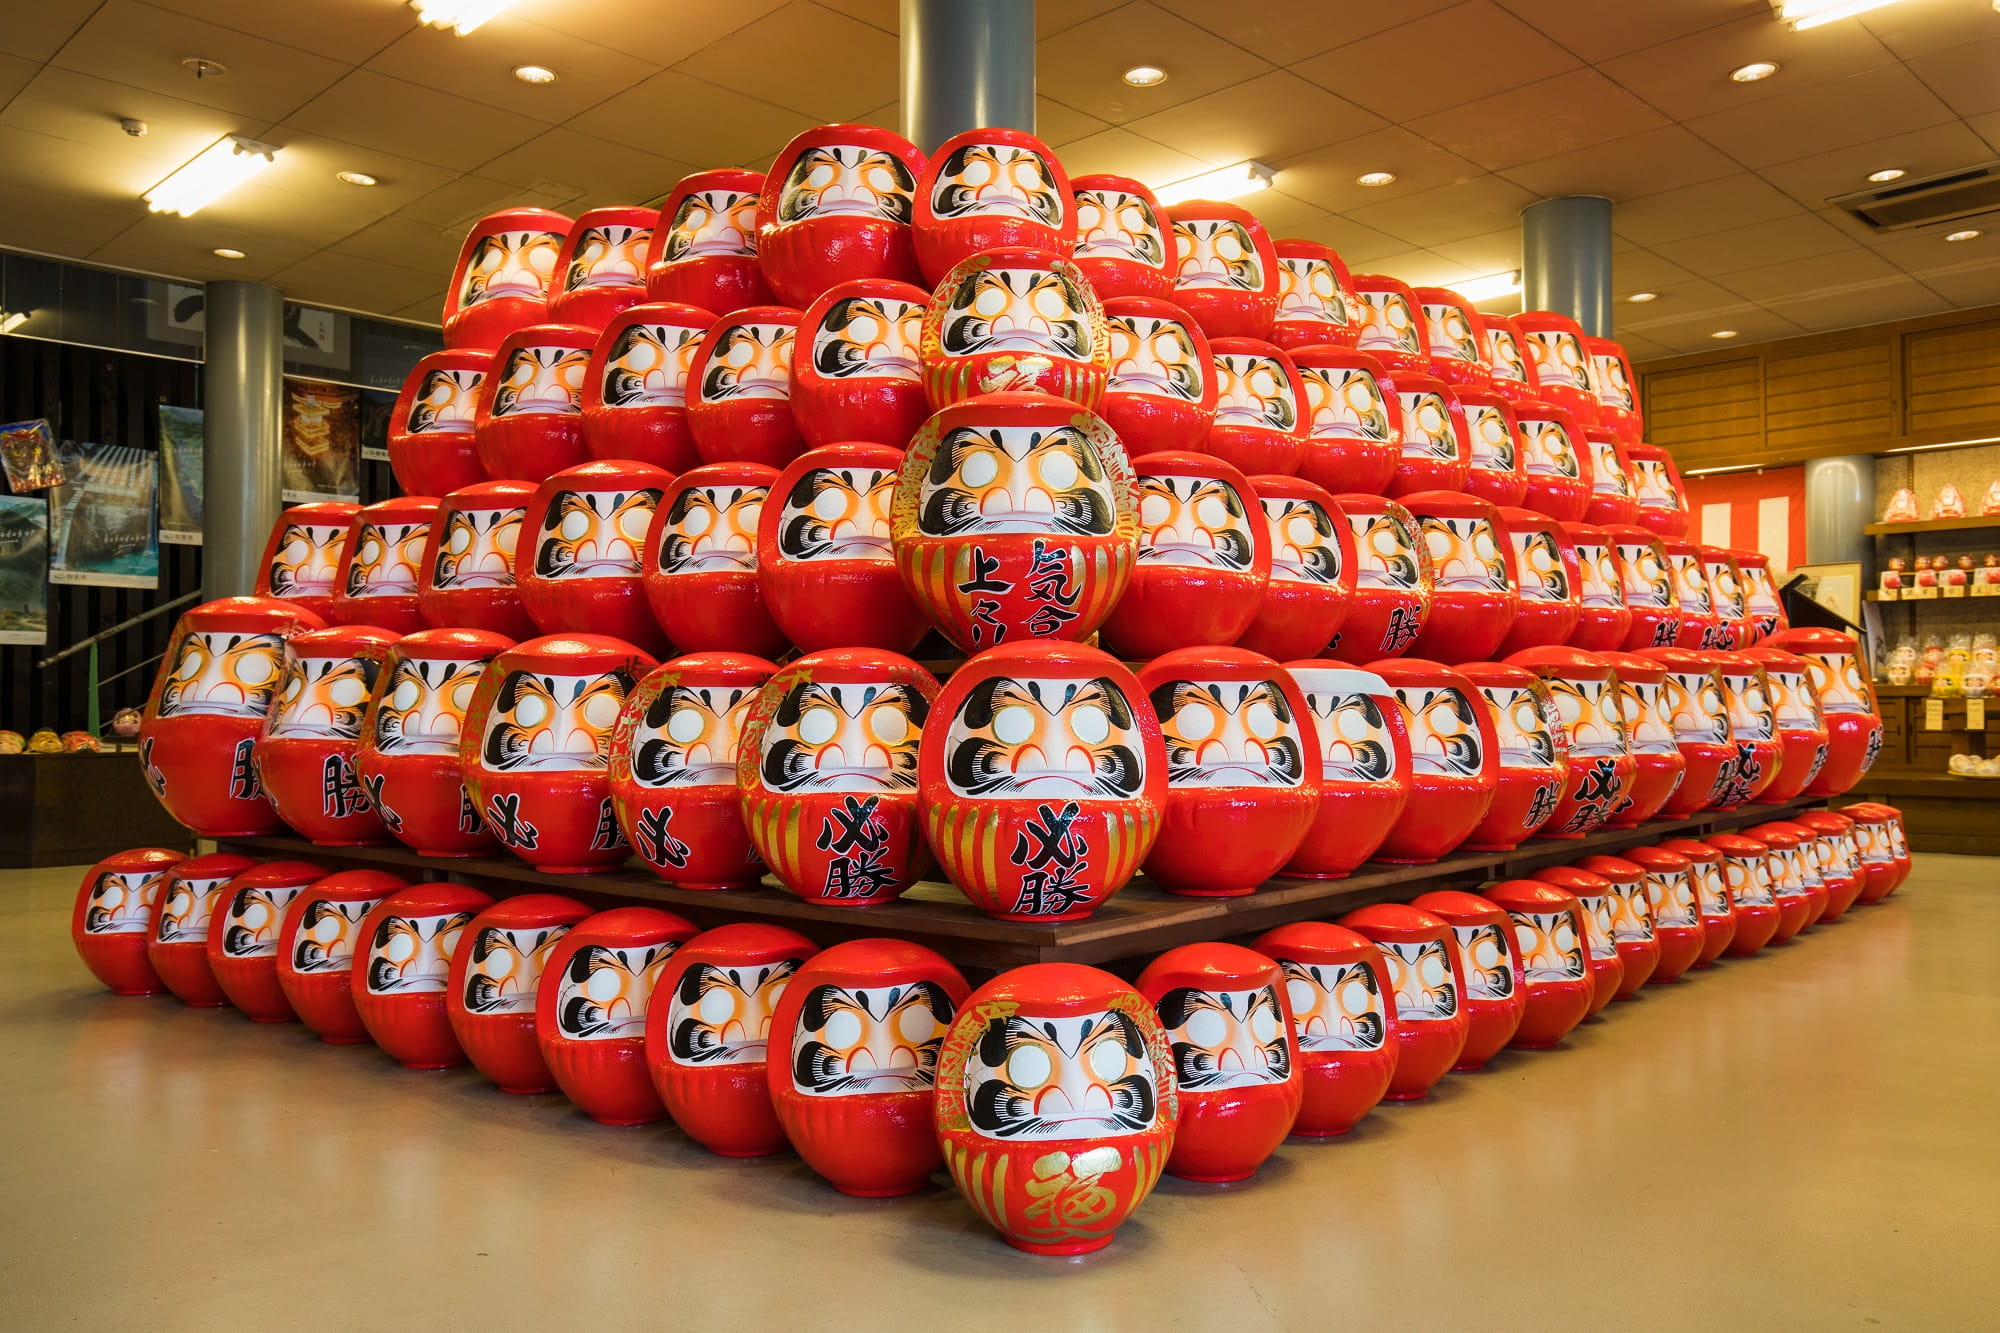 Learn about the history of daruma dolls, and even make one yourself, in Takasaki.